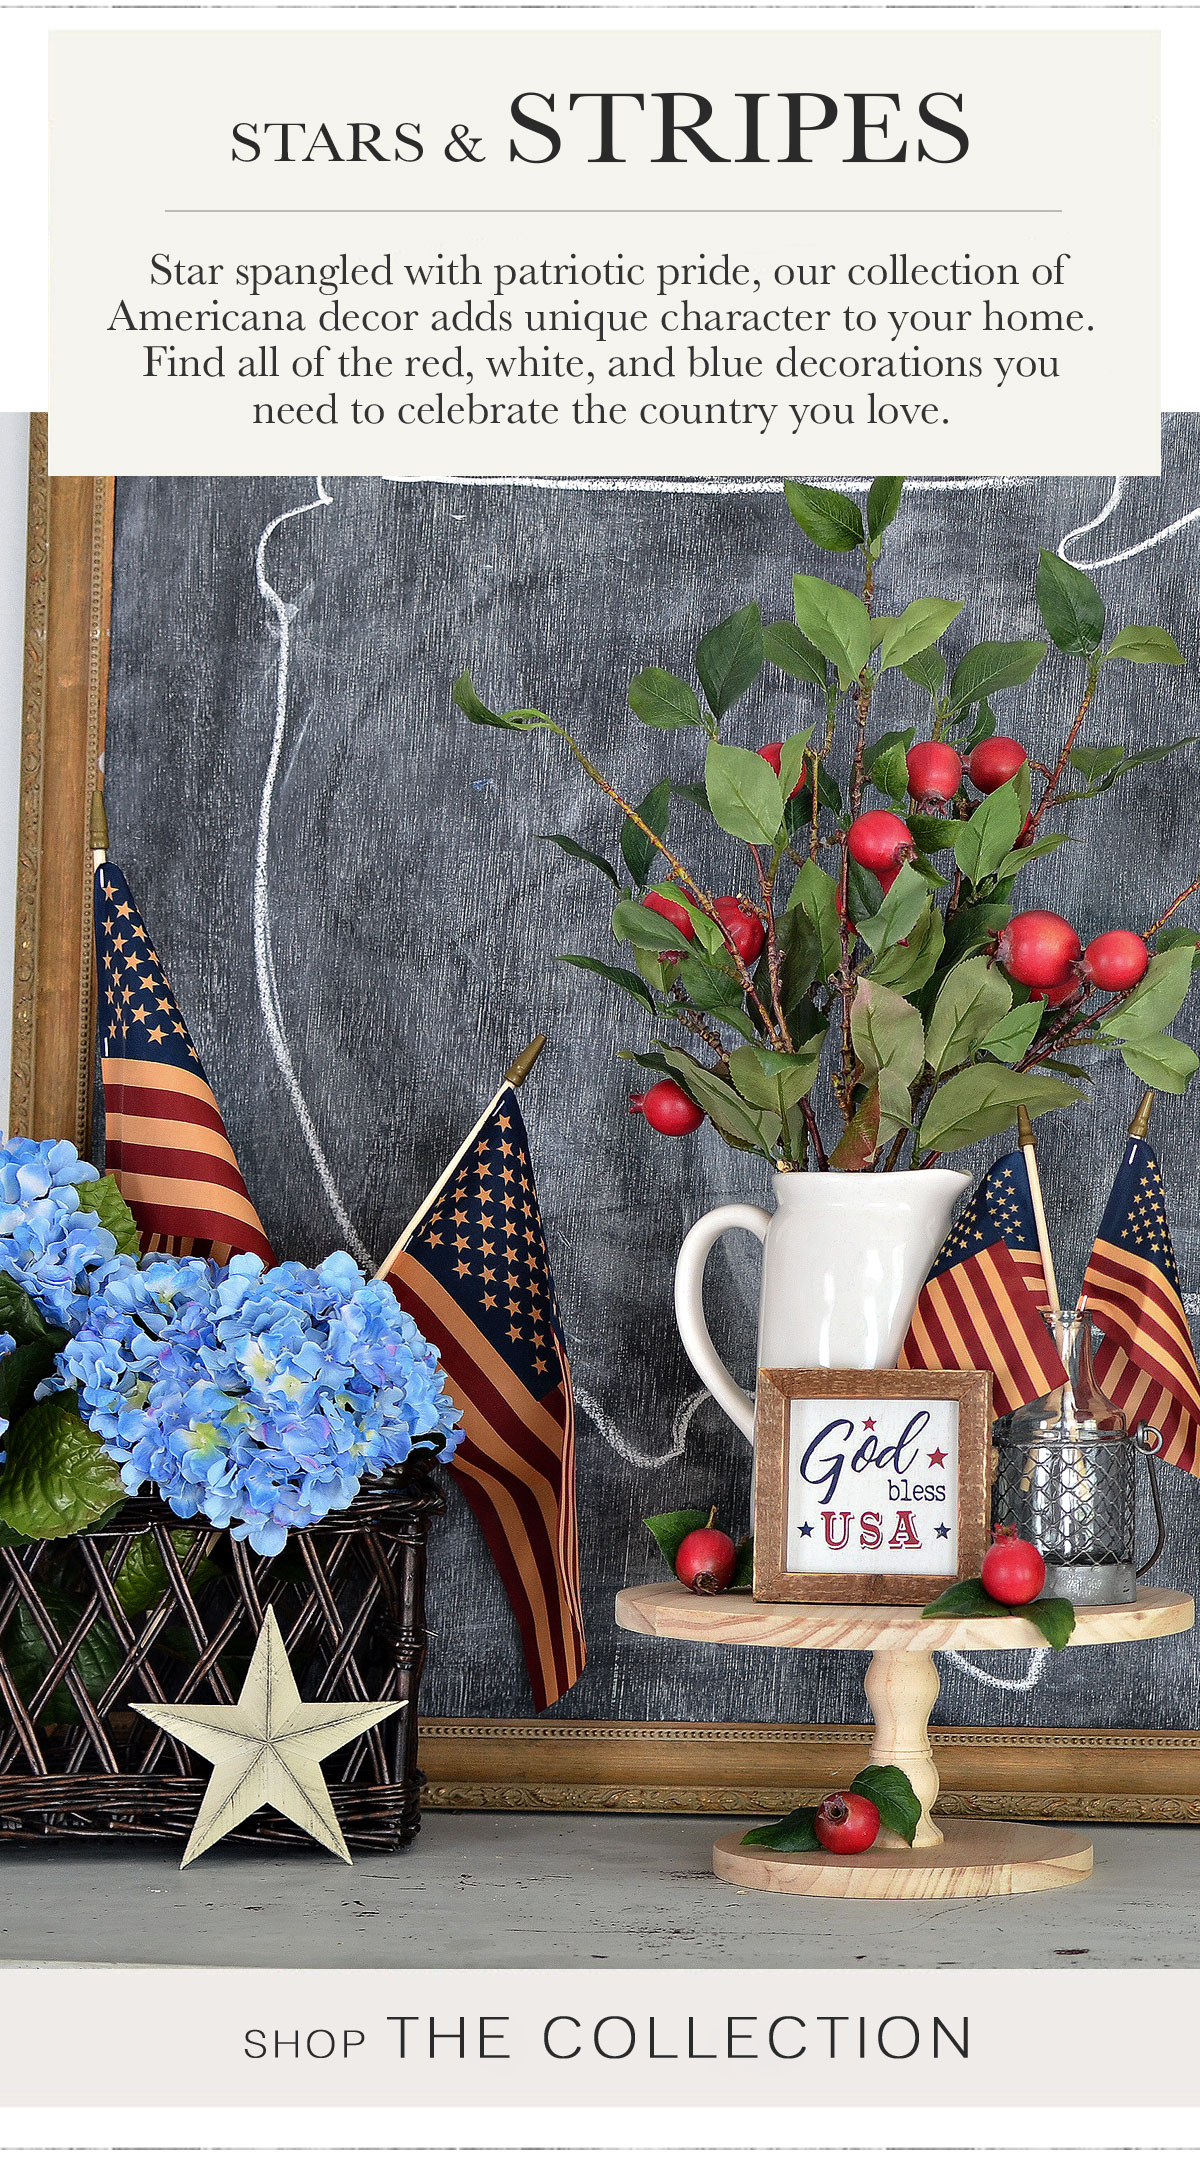 Stars & Stripes Star spangled with patriotic pride, our collection of Americana decor adds unique character to your home. Find all of the red, white, and blue decorations you need to celebrate the country you love.  Shop The Collection